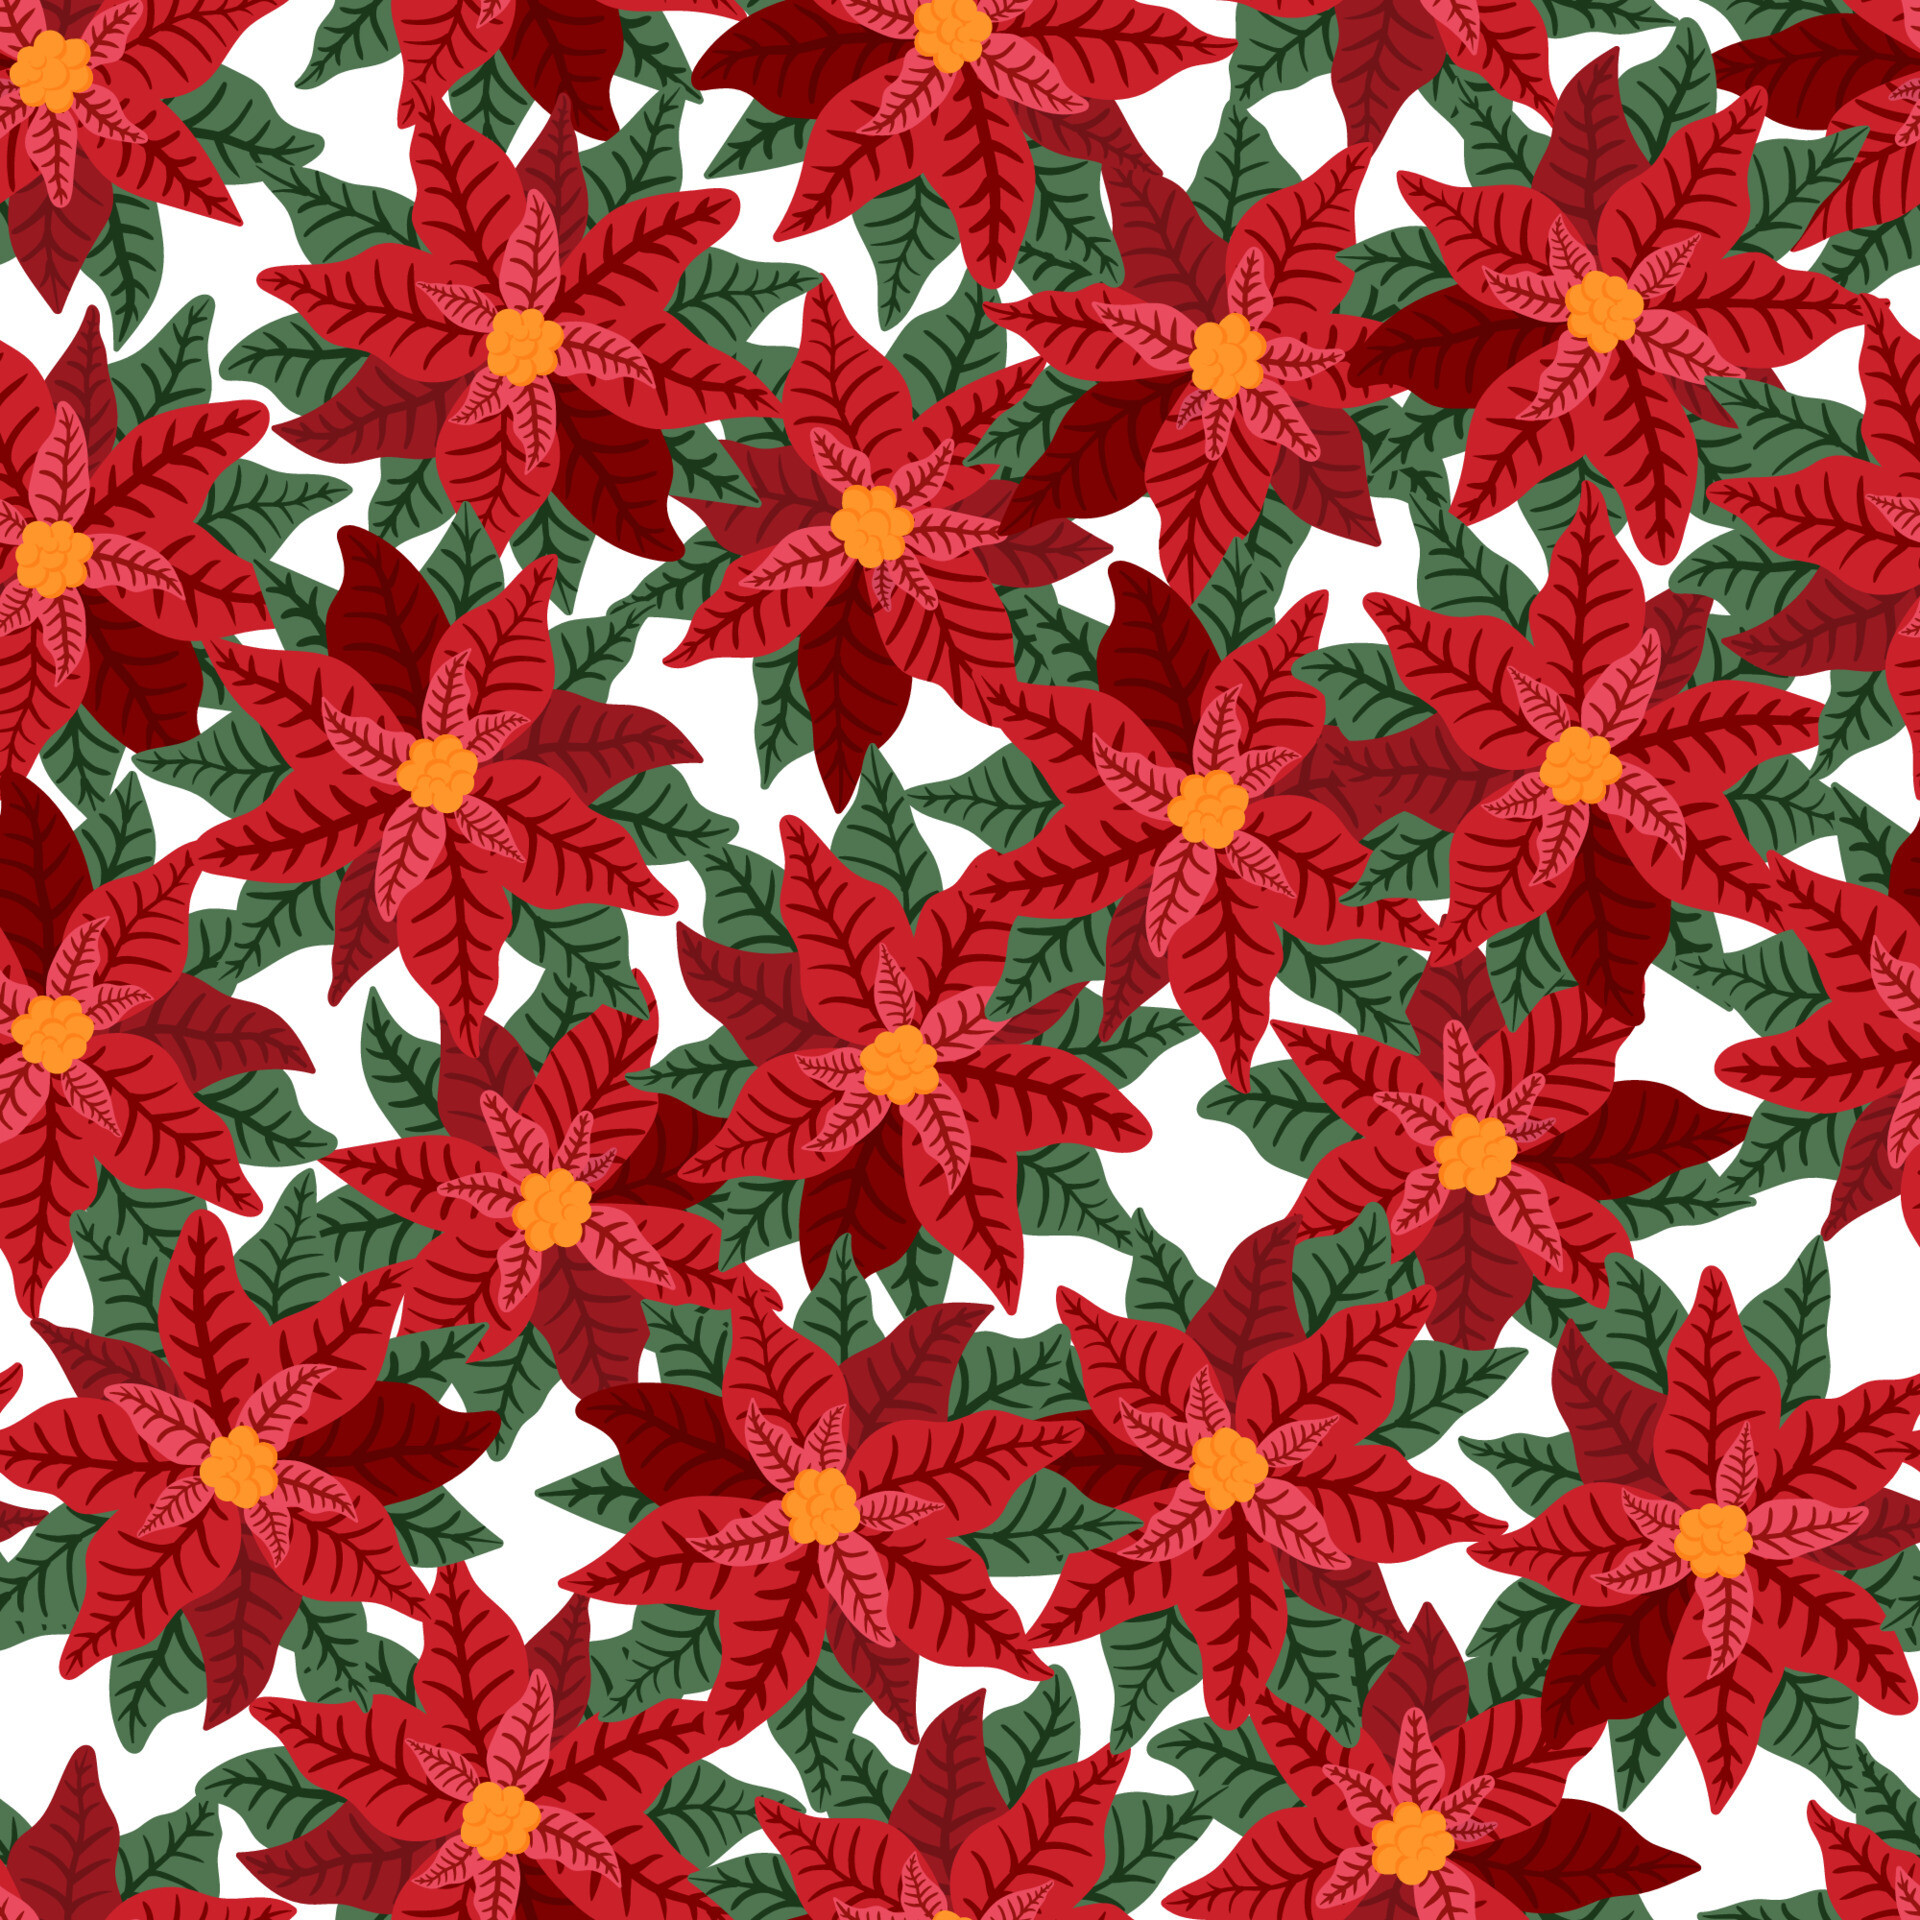 Poinsettia: Red star flower, Christmas or New Year decoration, Pattern. 1920x1920 HD Wallpaper.